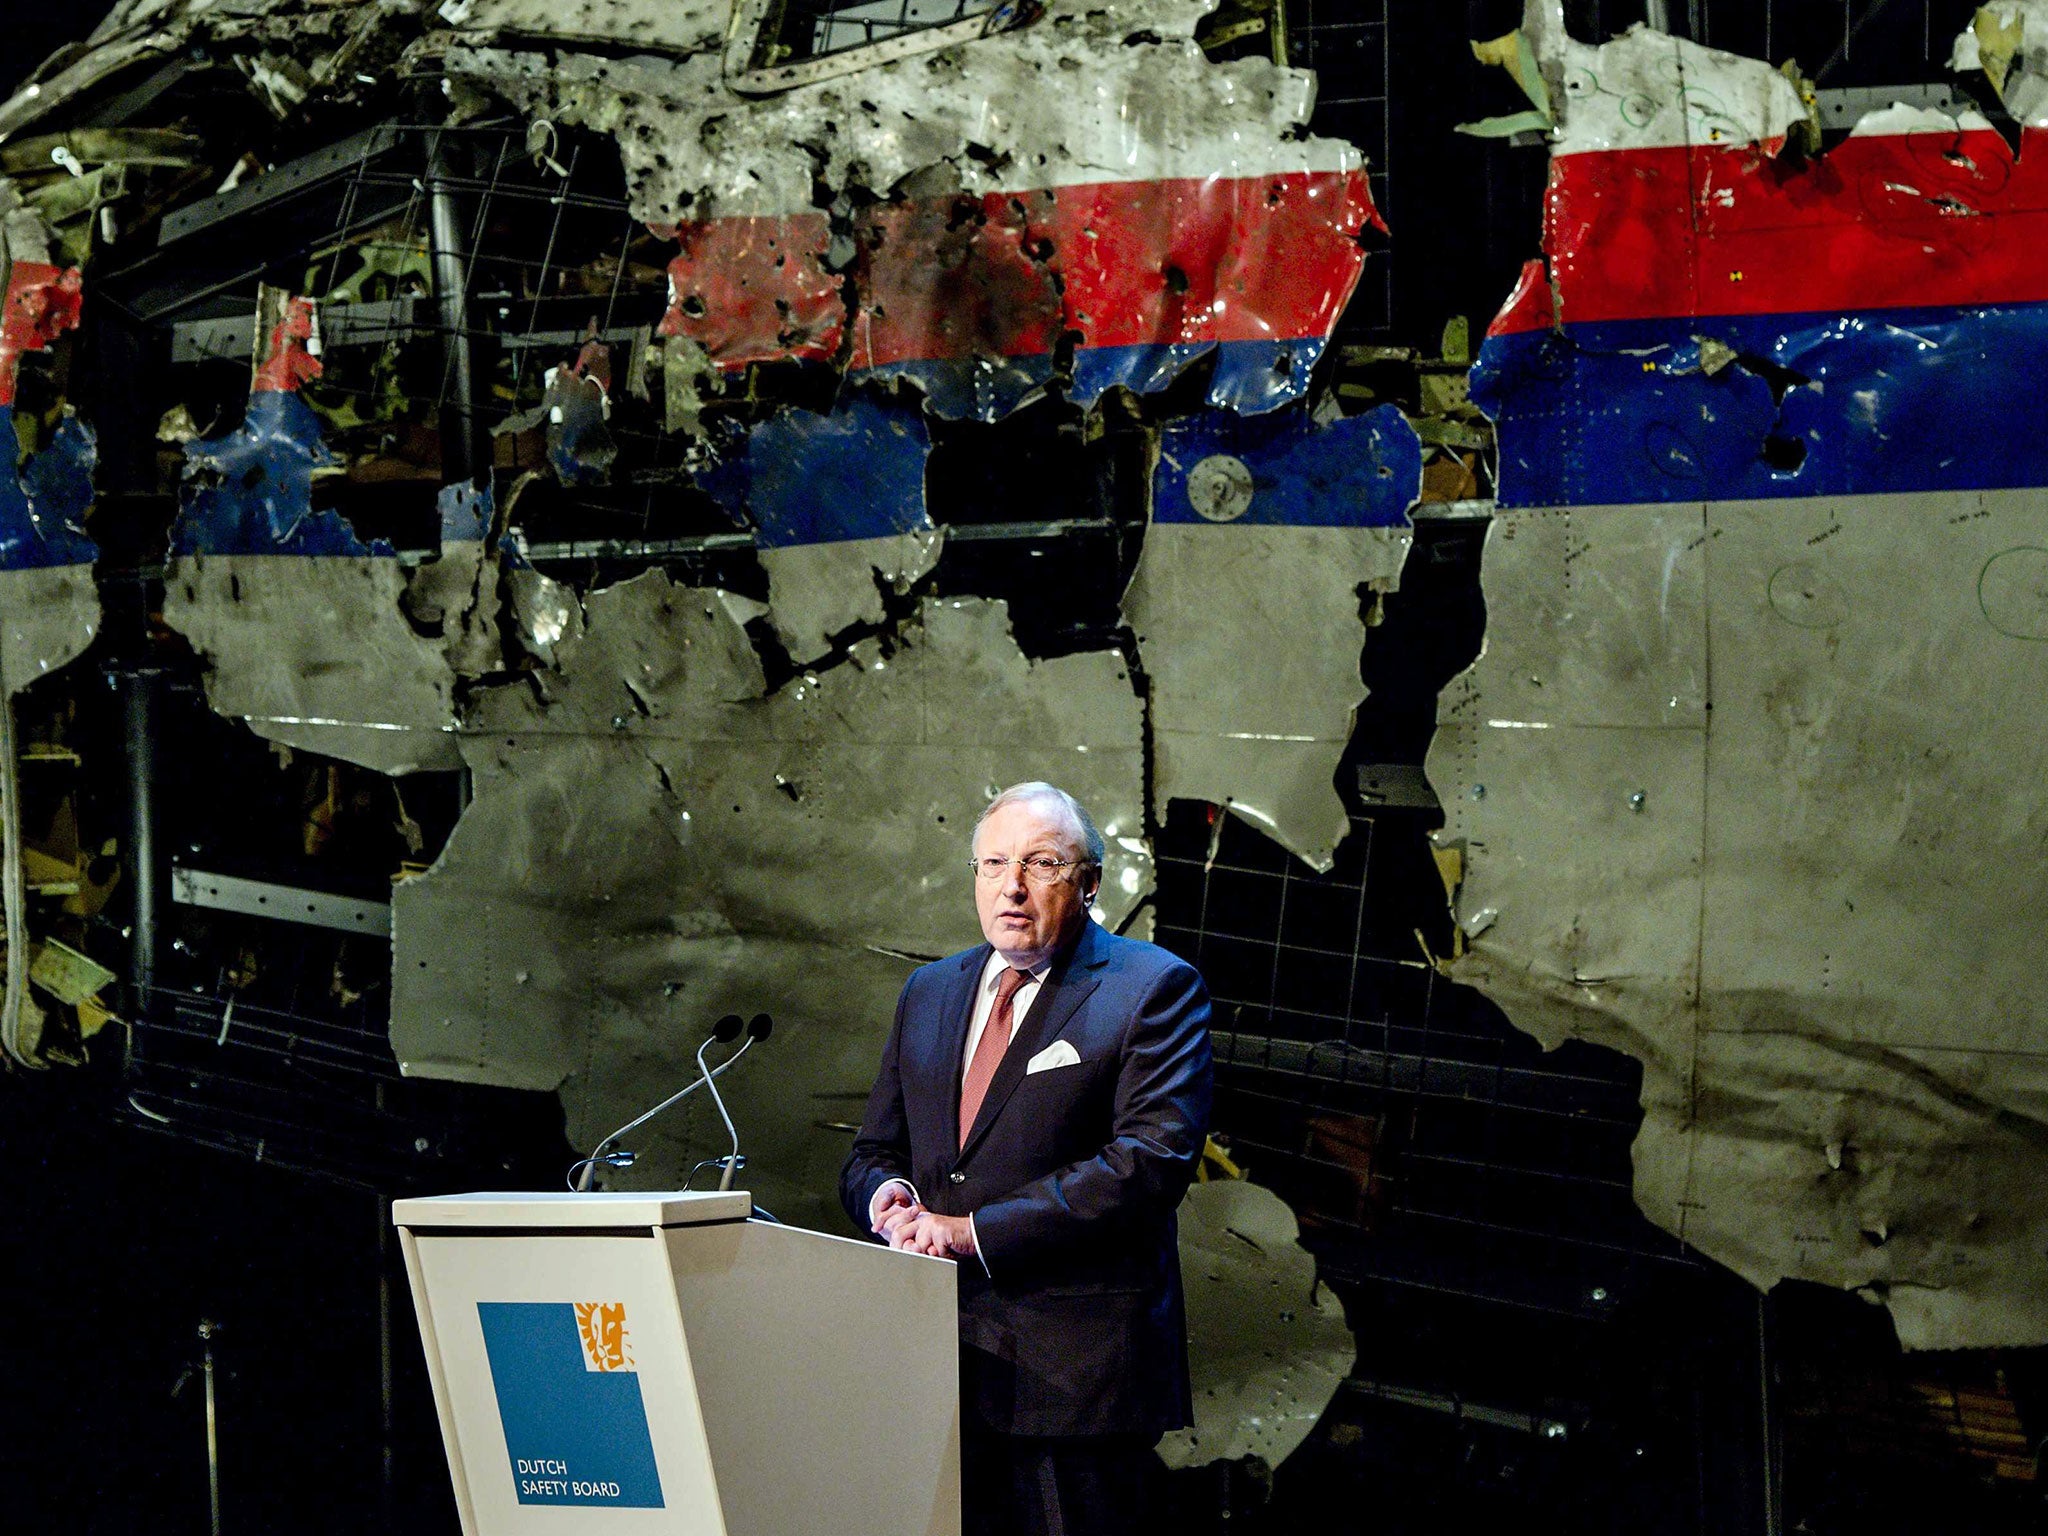 Tjibbe Joustra, Chairman of the Dutch Safety Board presenting the MH17 report on 13 October 2015.